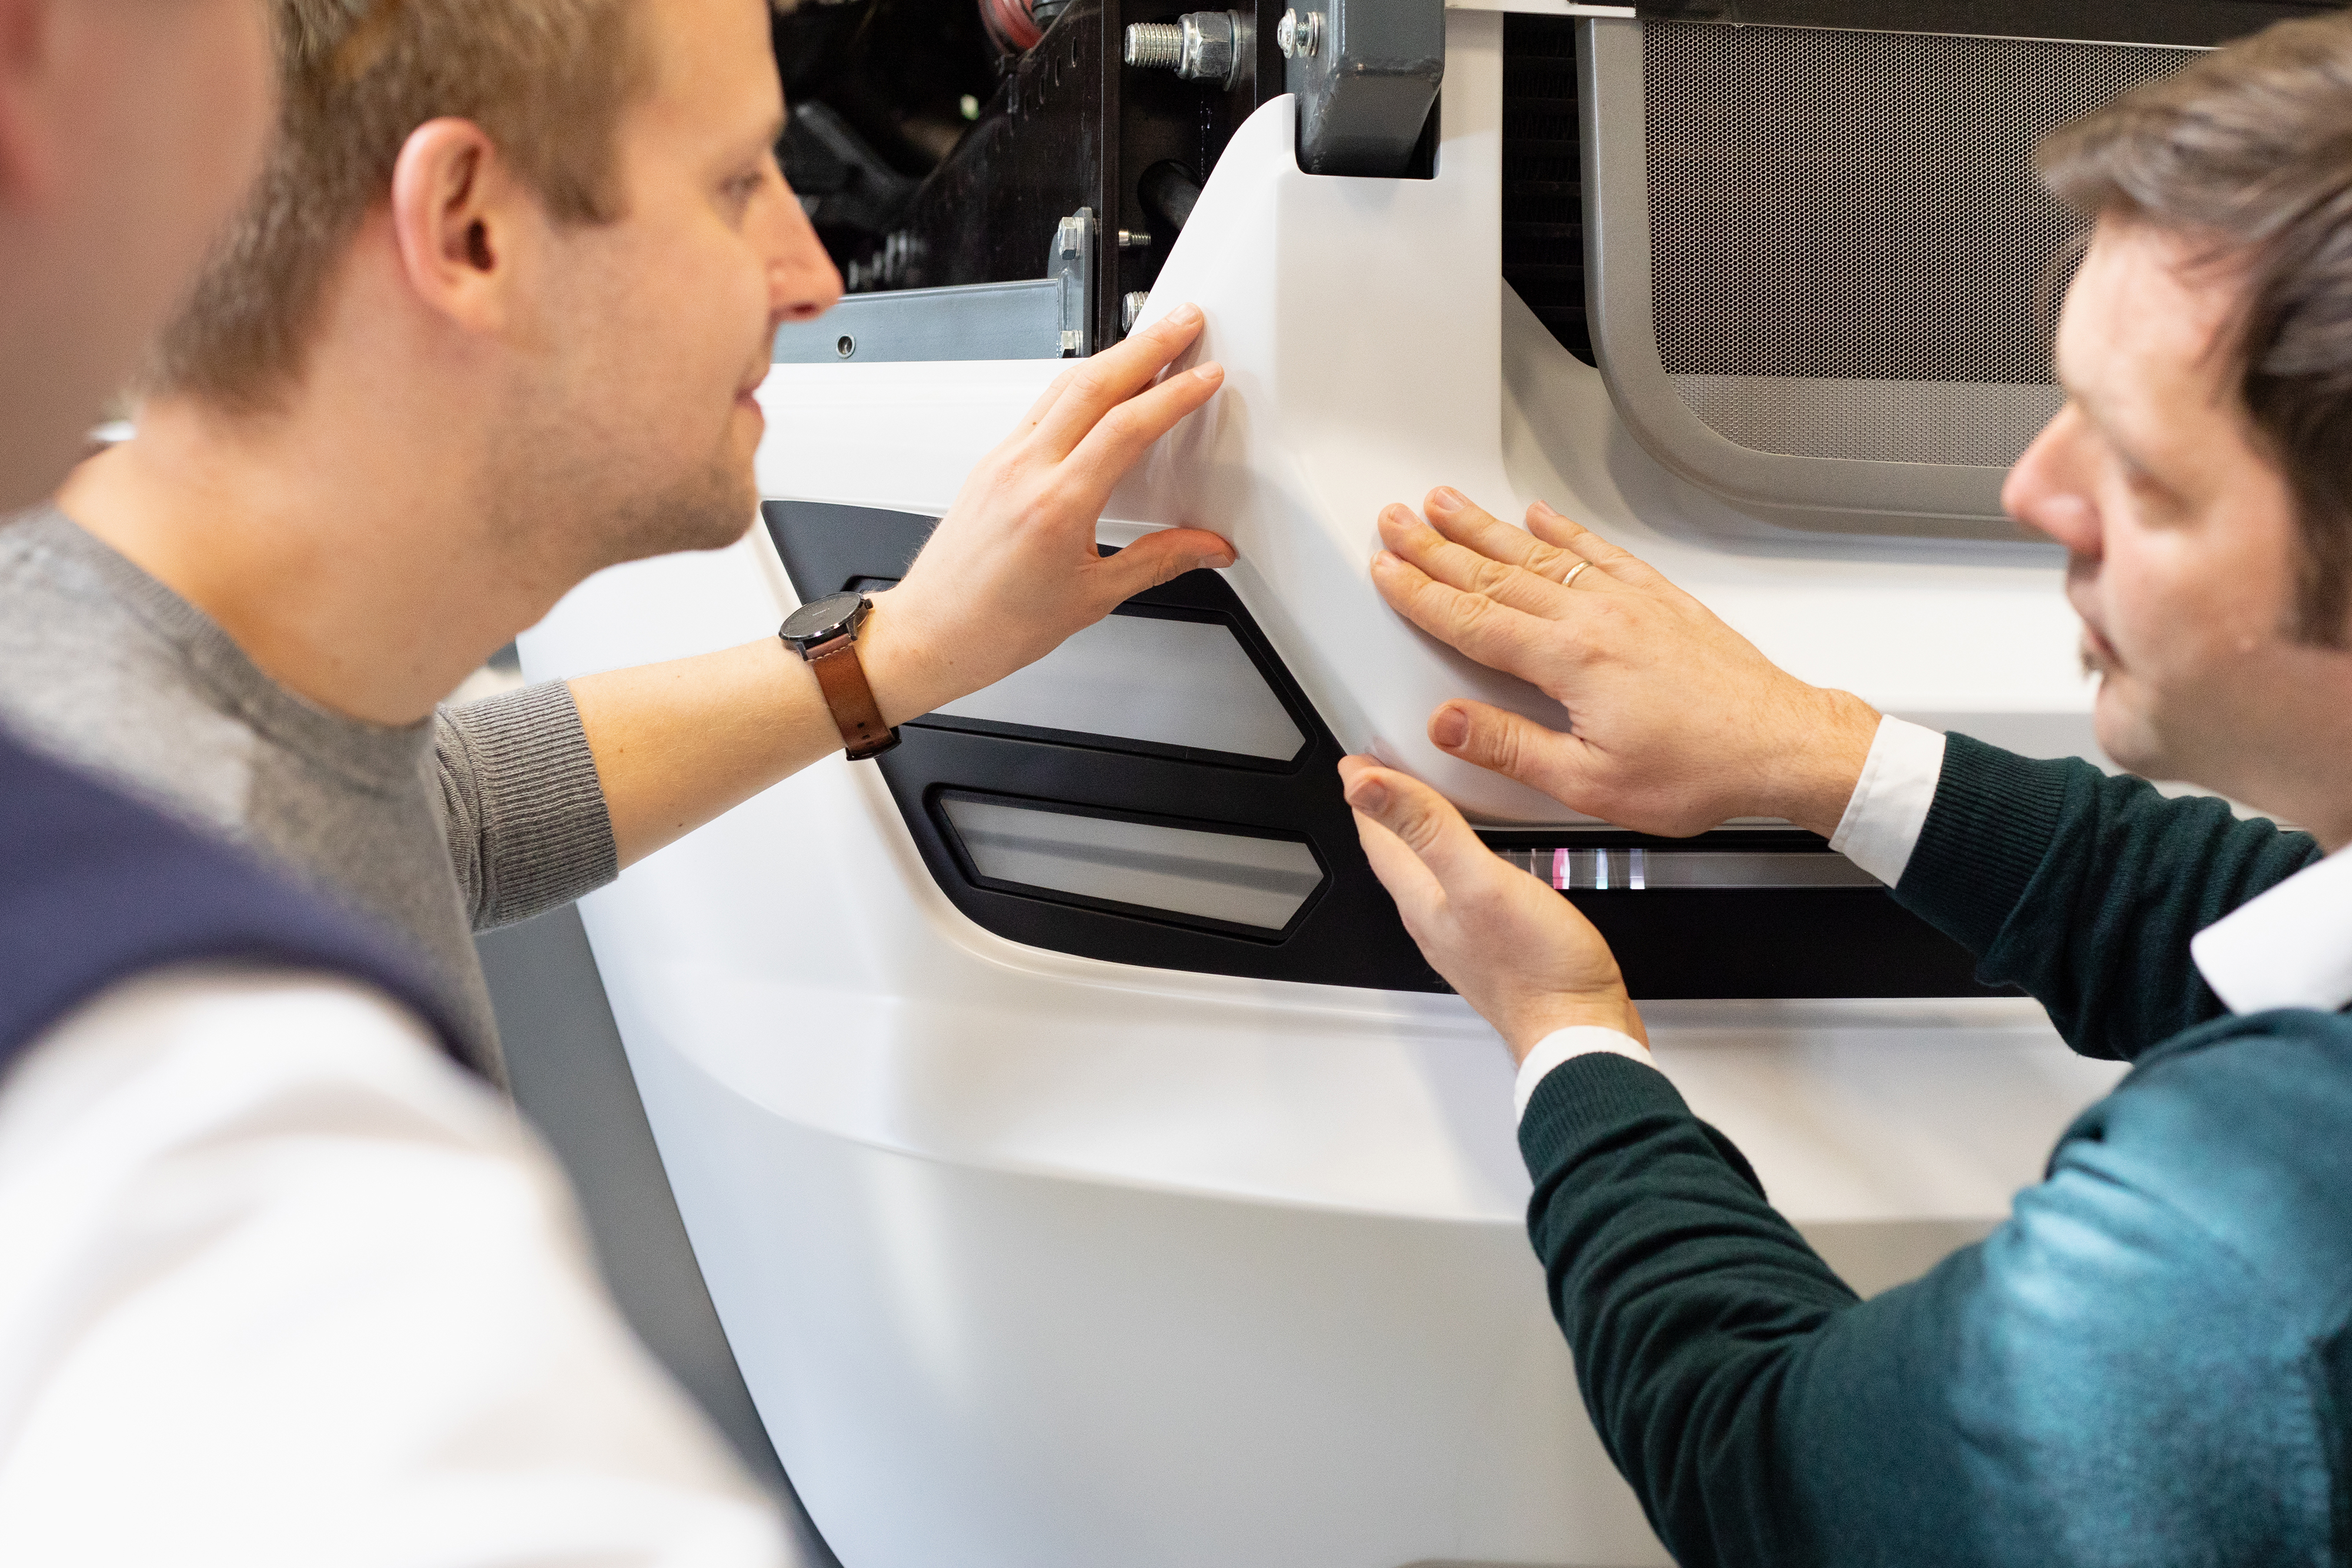 Design is increasingly gaining importance in Fraunhofer's research. This is why the three Fraunhofer Institutes IVI, IWS and IWU in Dresden, together with Technische Universität Dresden, are establishing the “DesignLab for Applied Research”.